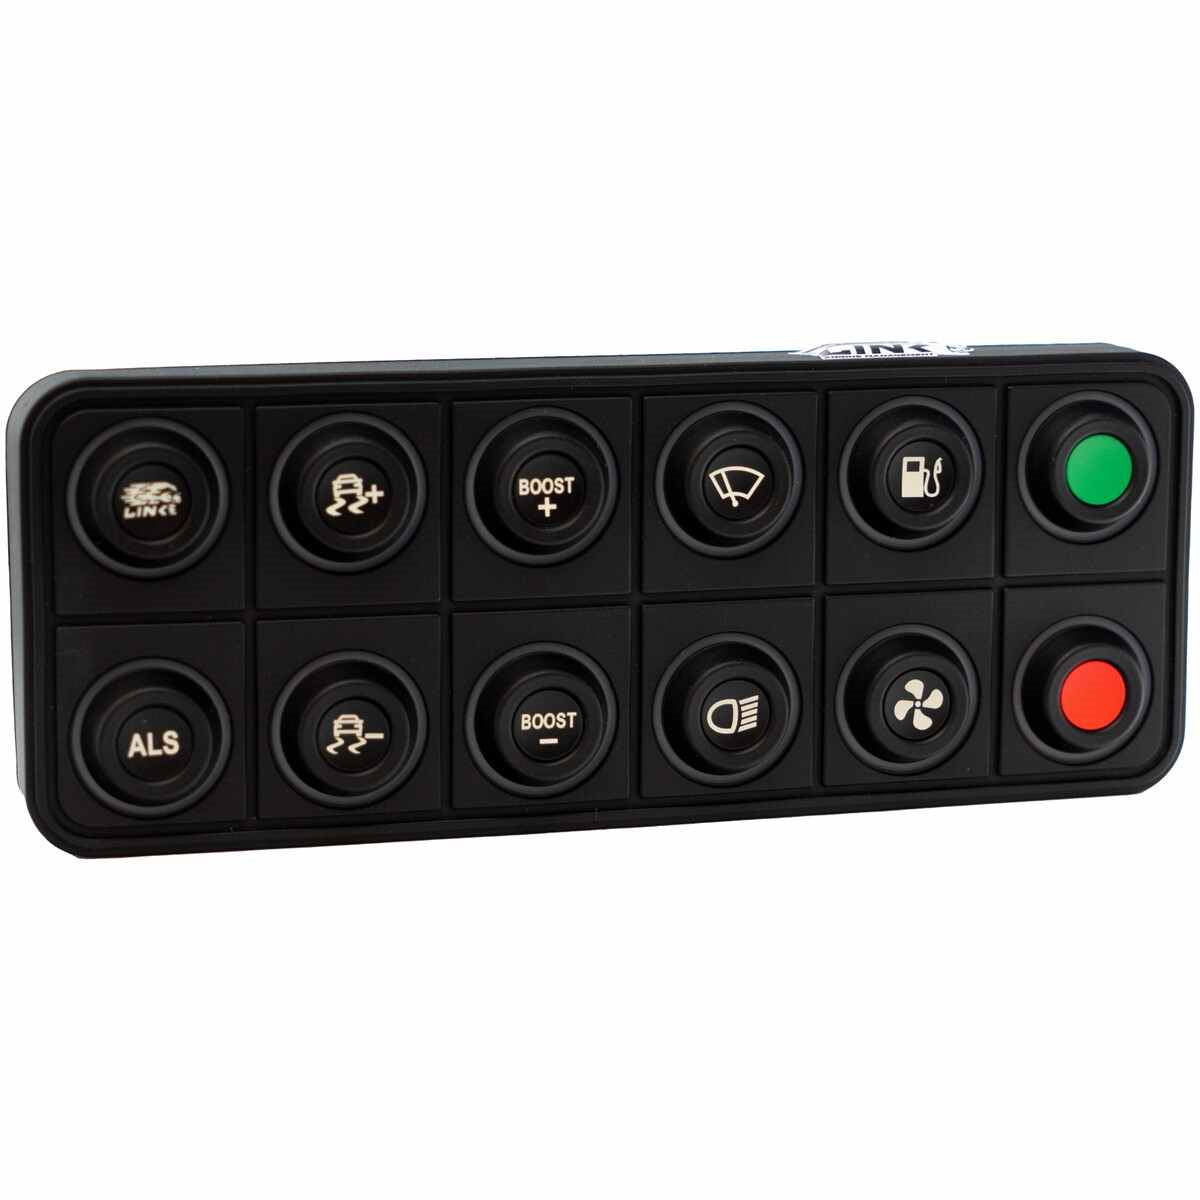 Link CAN Keypad 12 button - 101-0239